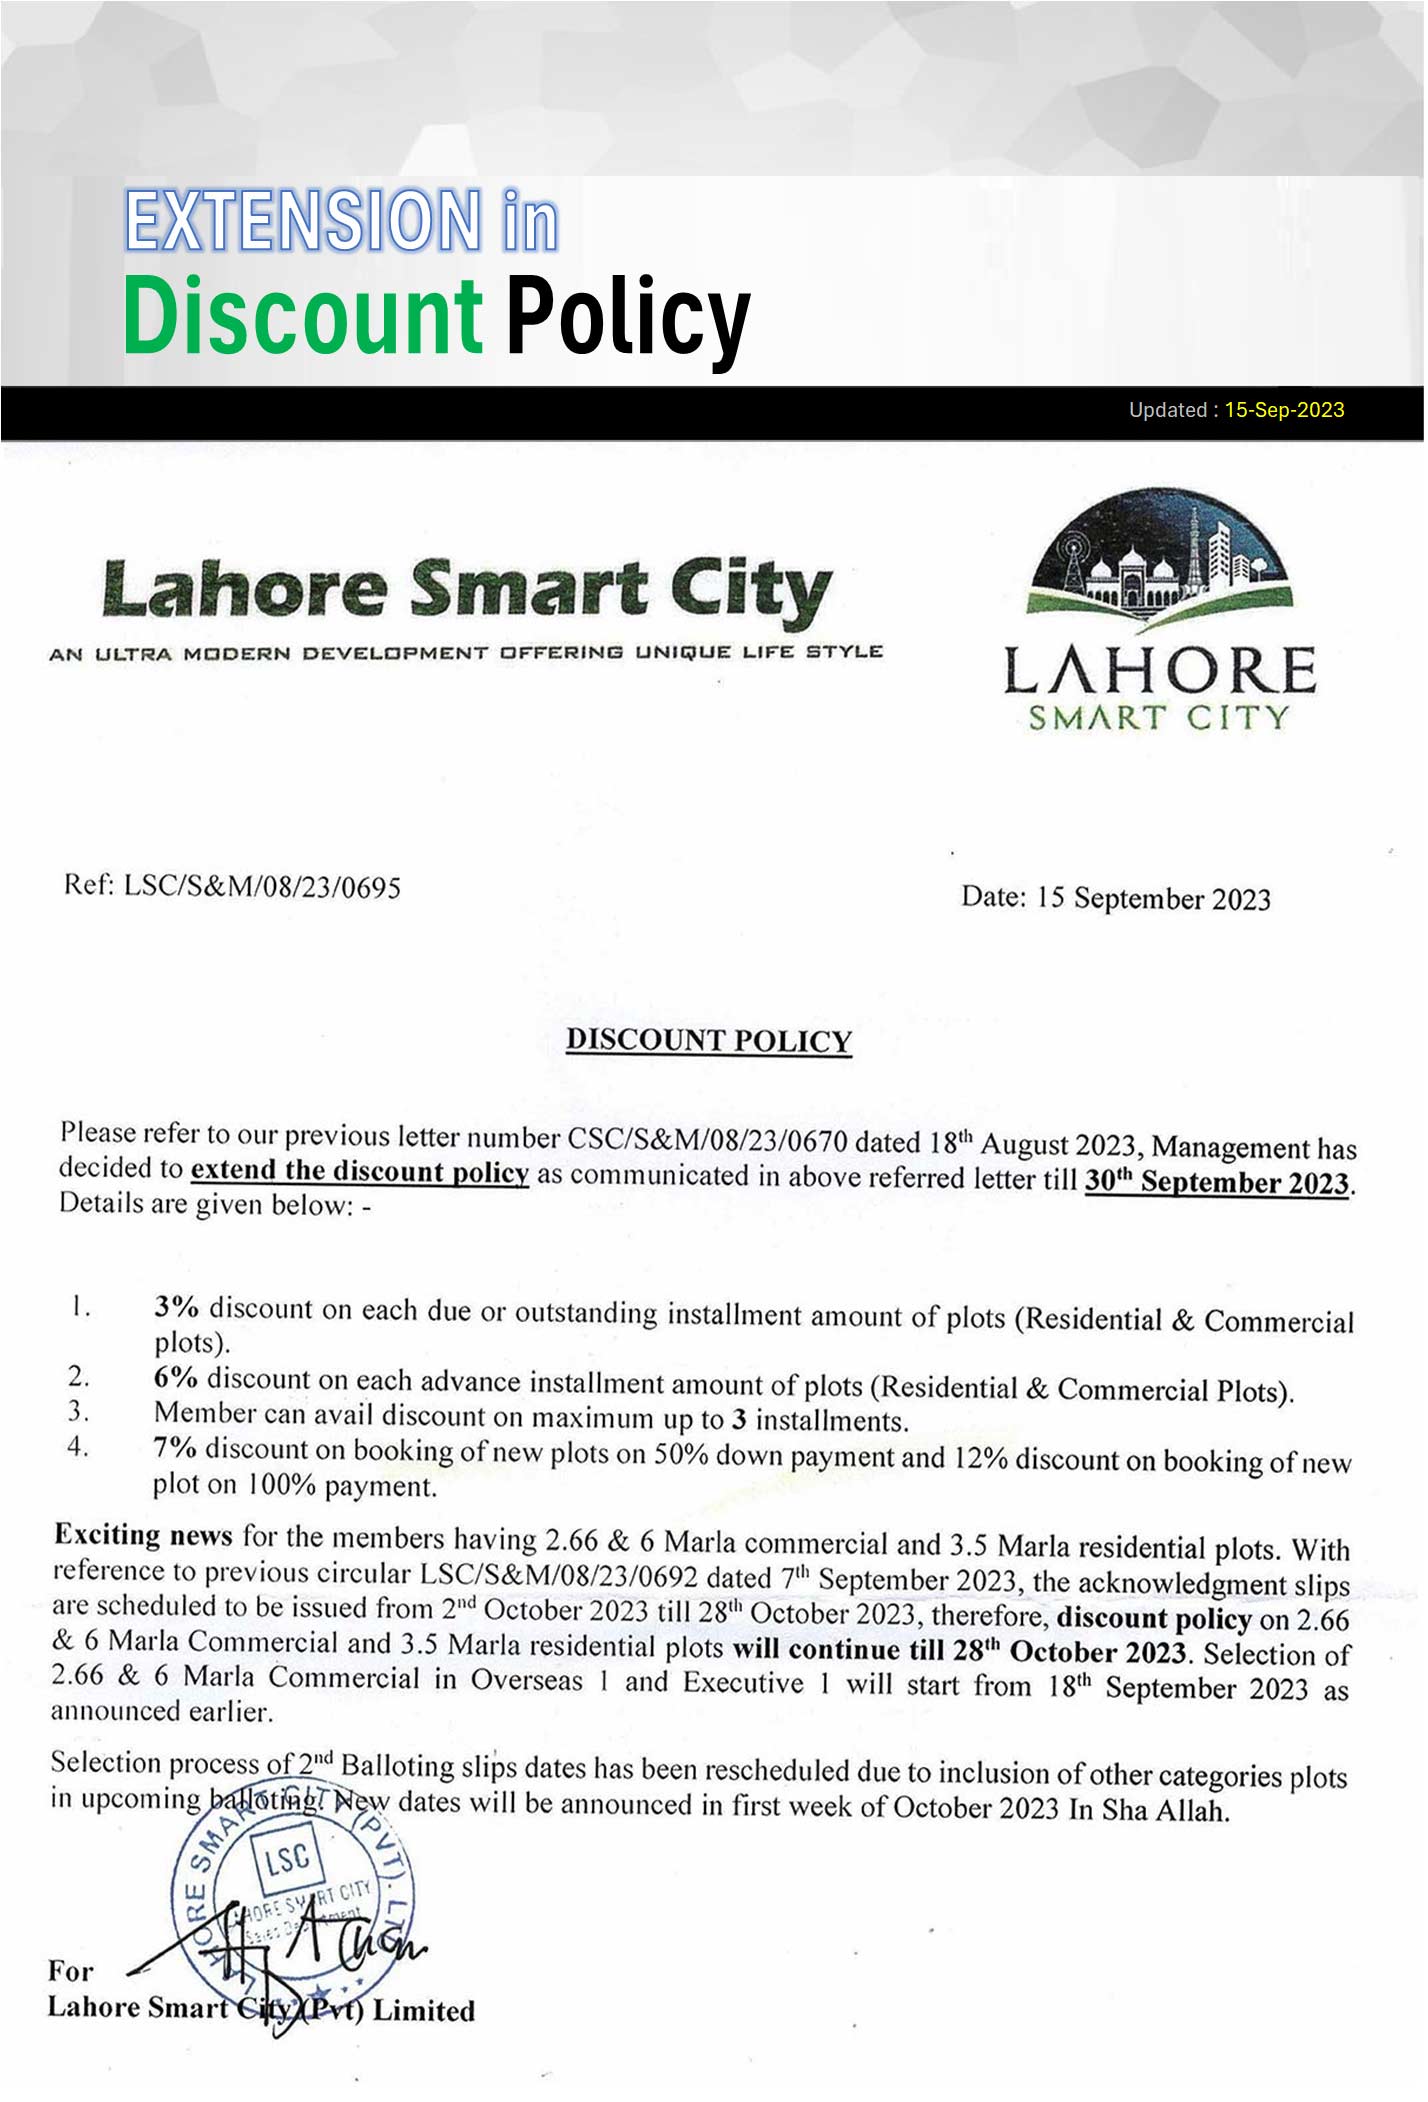 Extension in "Discount Policy" for Lahore Smart City